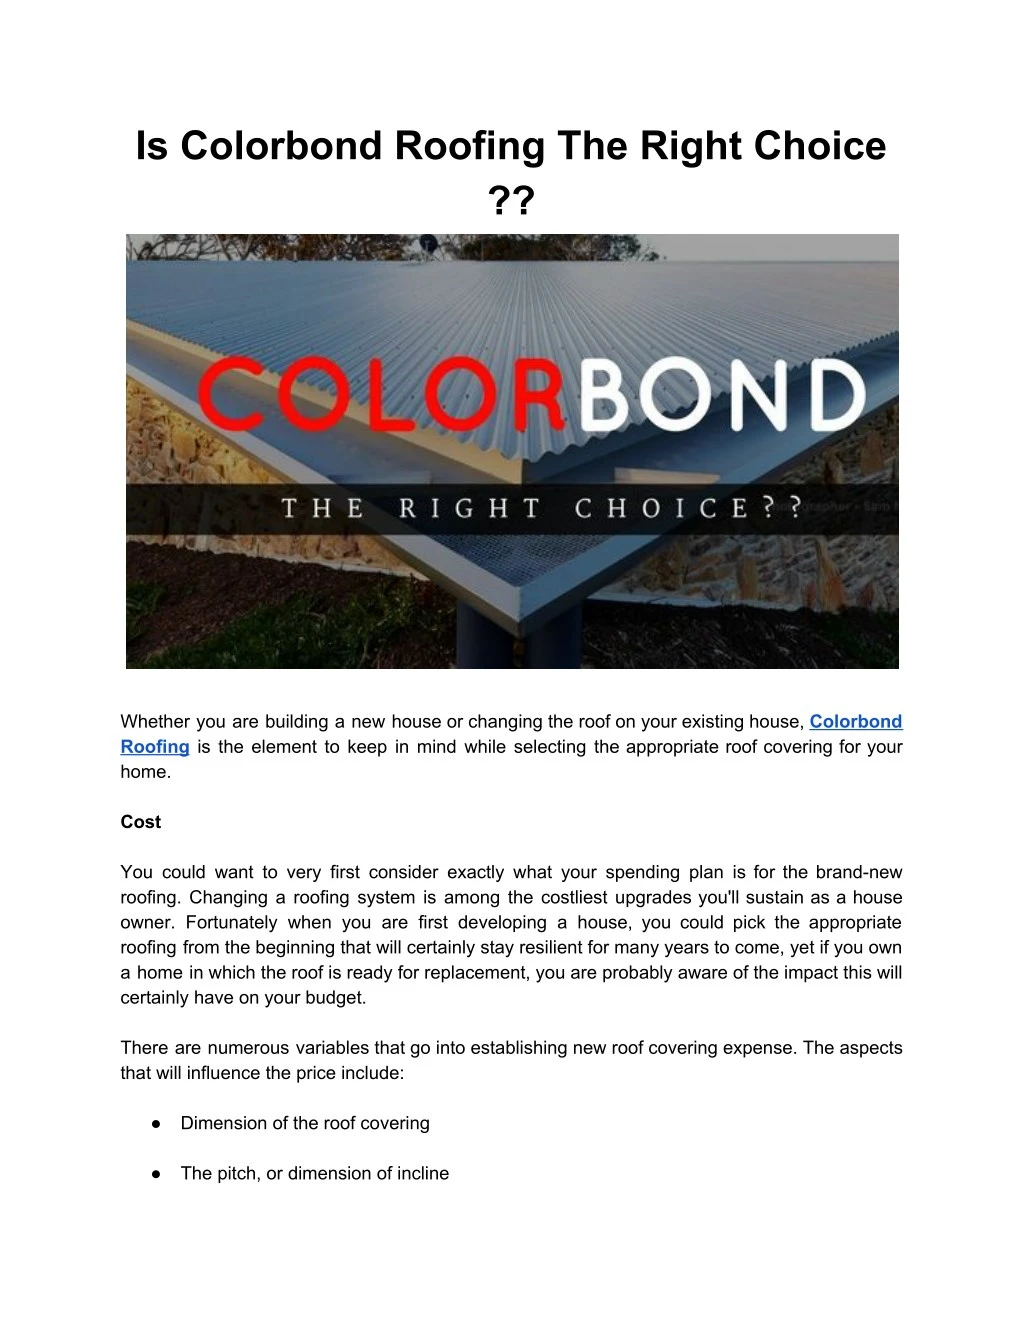 is colorbond roofing the right choice